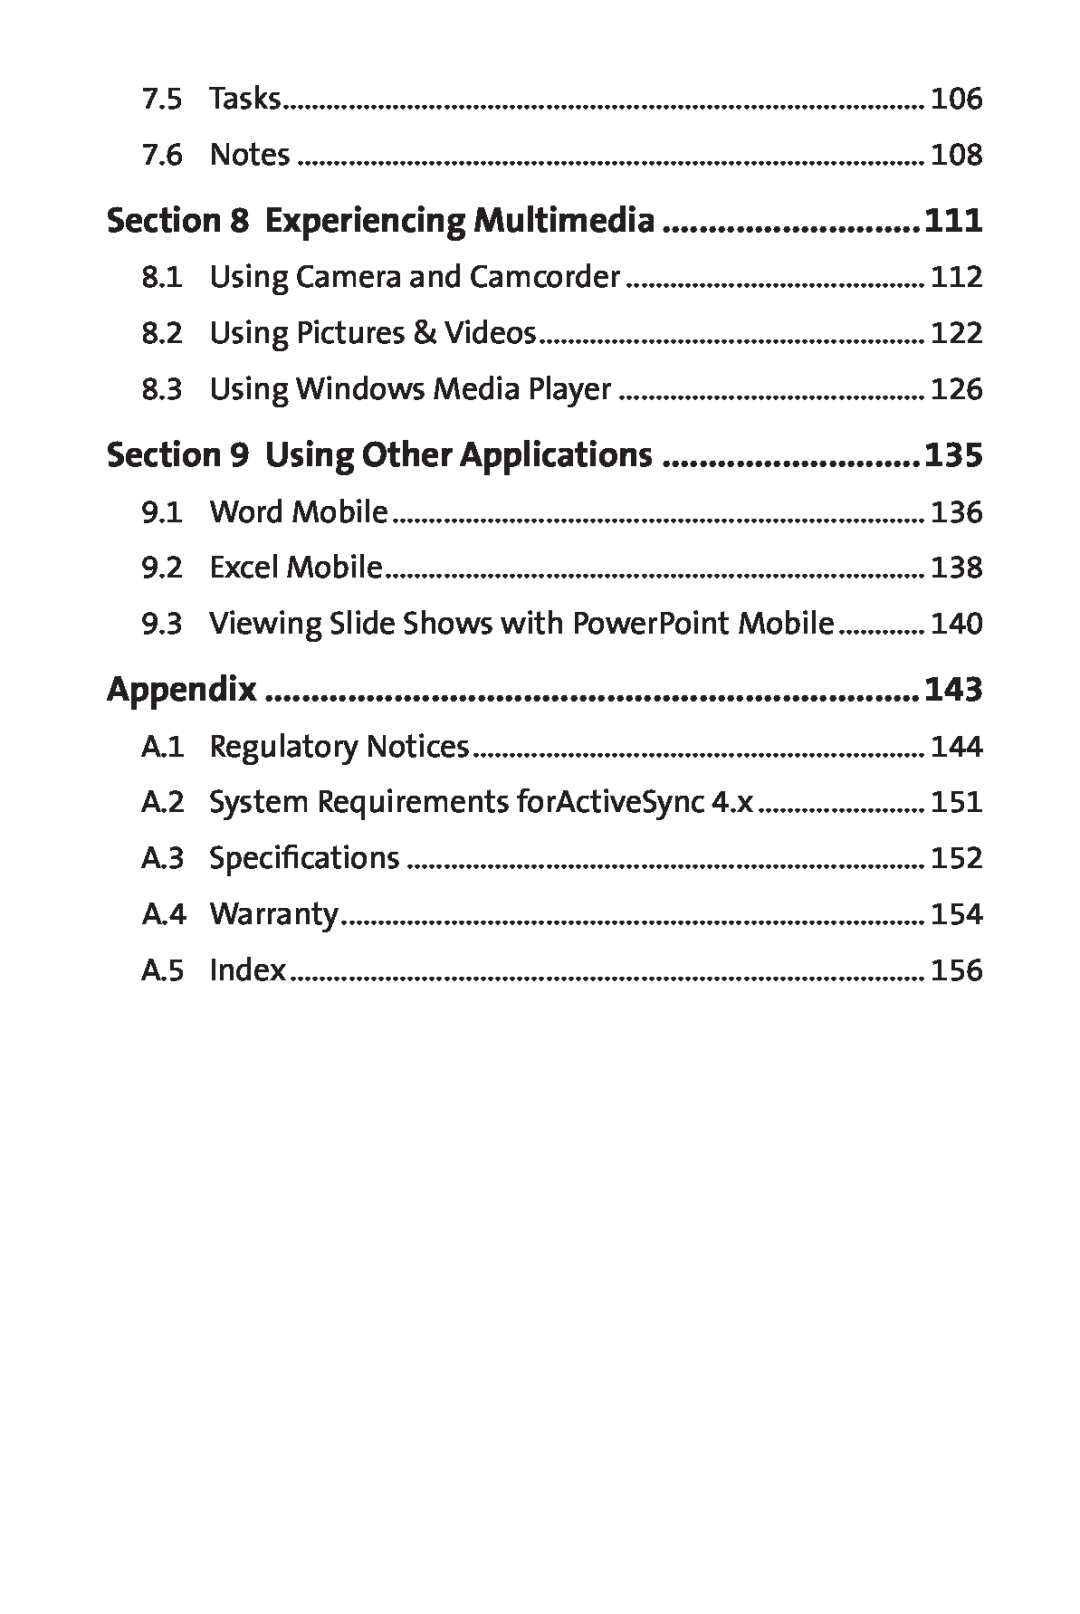 Sprint Nextel PPC-6700 manual Experiencing Multimedia, Using Other Applications, Appendix 